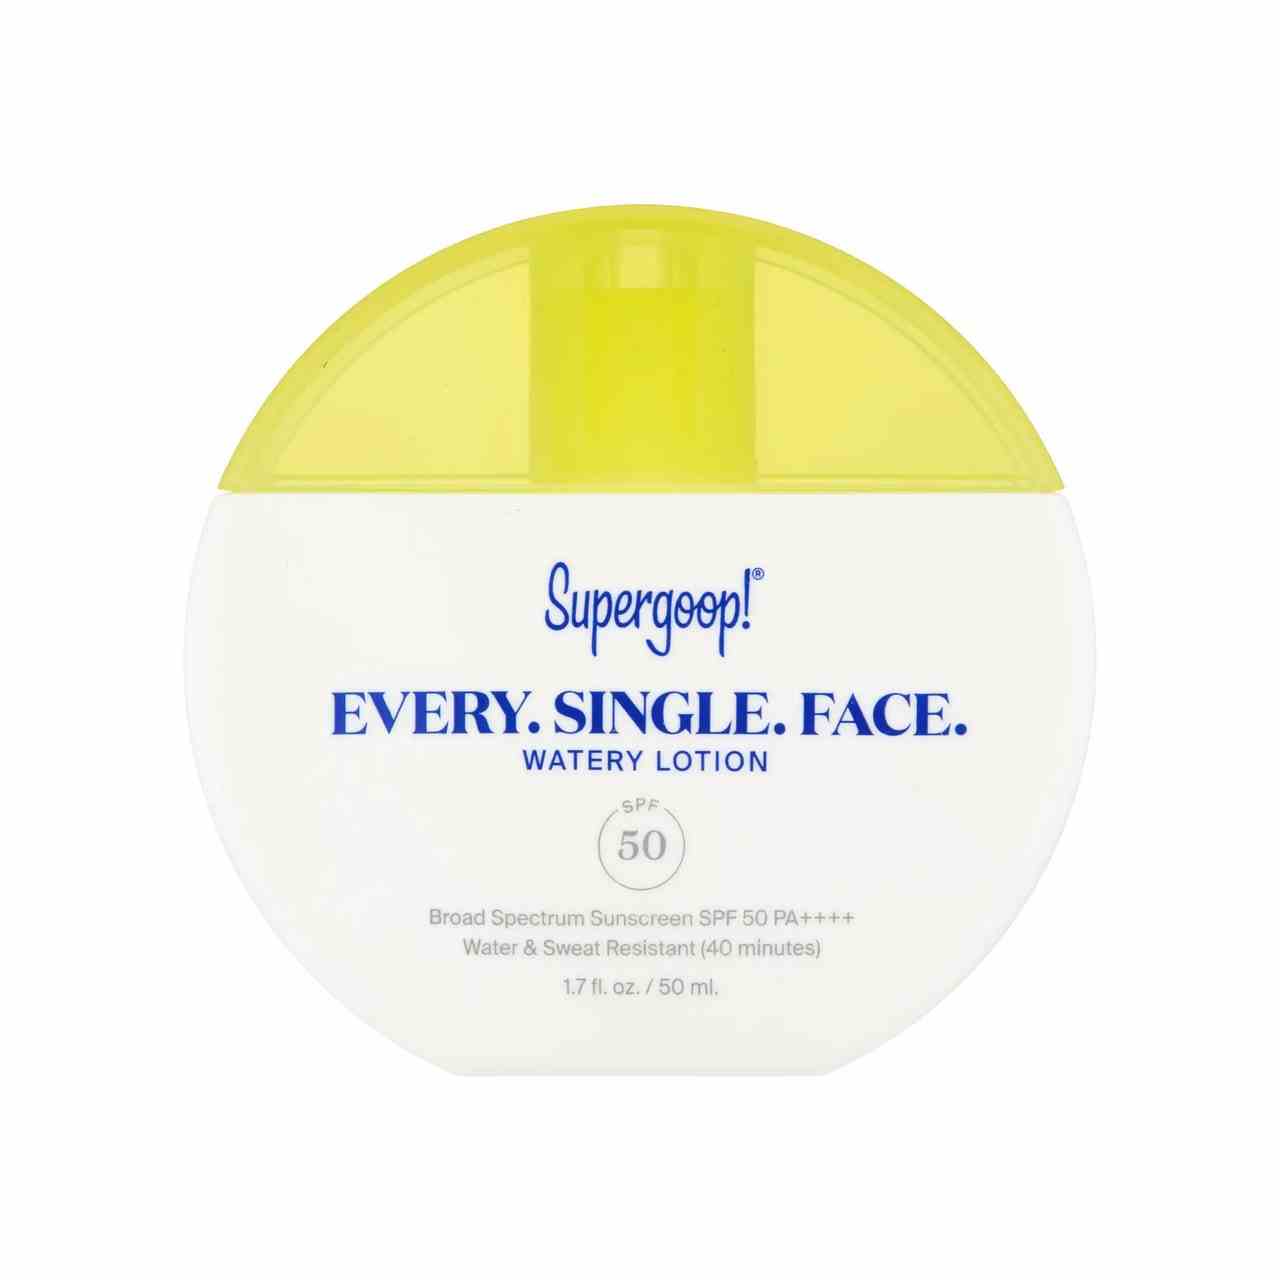 Supergoop! Every. Single. Face. Watery Lotion SPF 50 round white bottle with yellow lid on white background